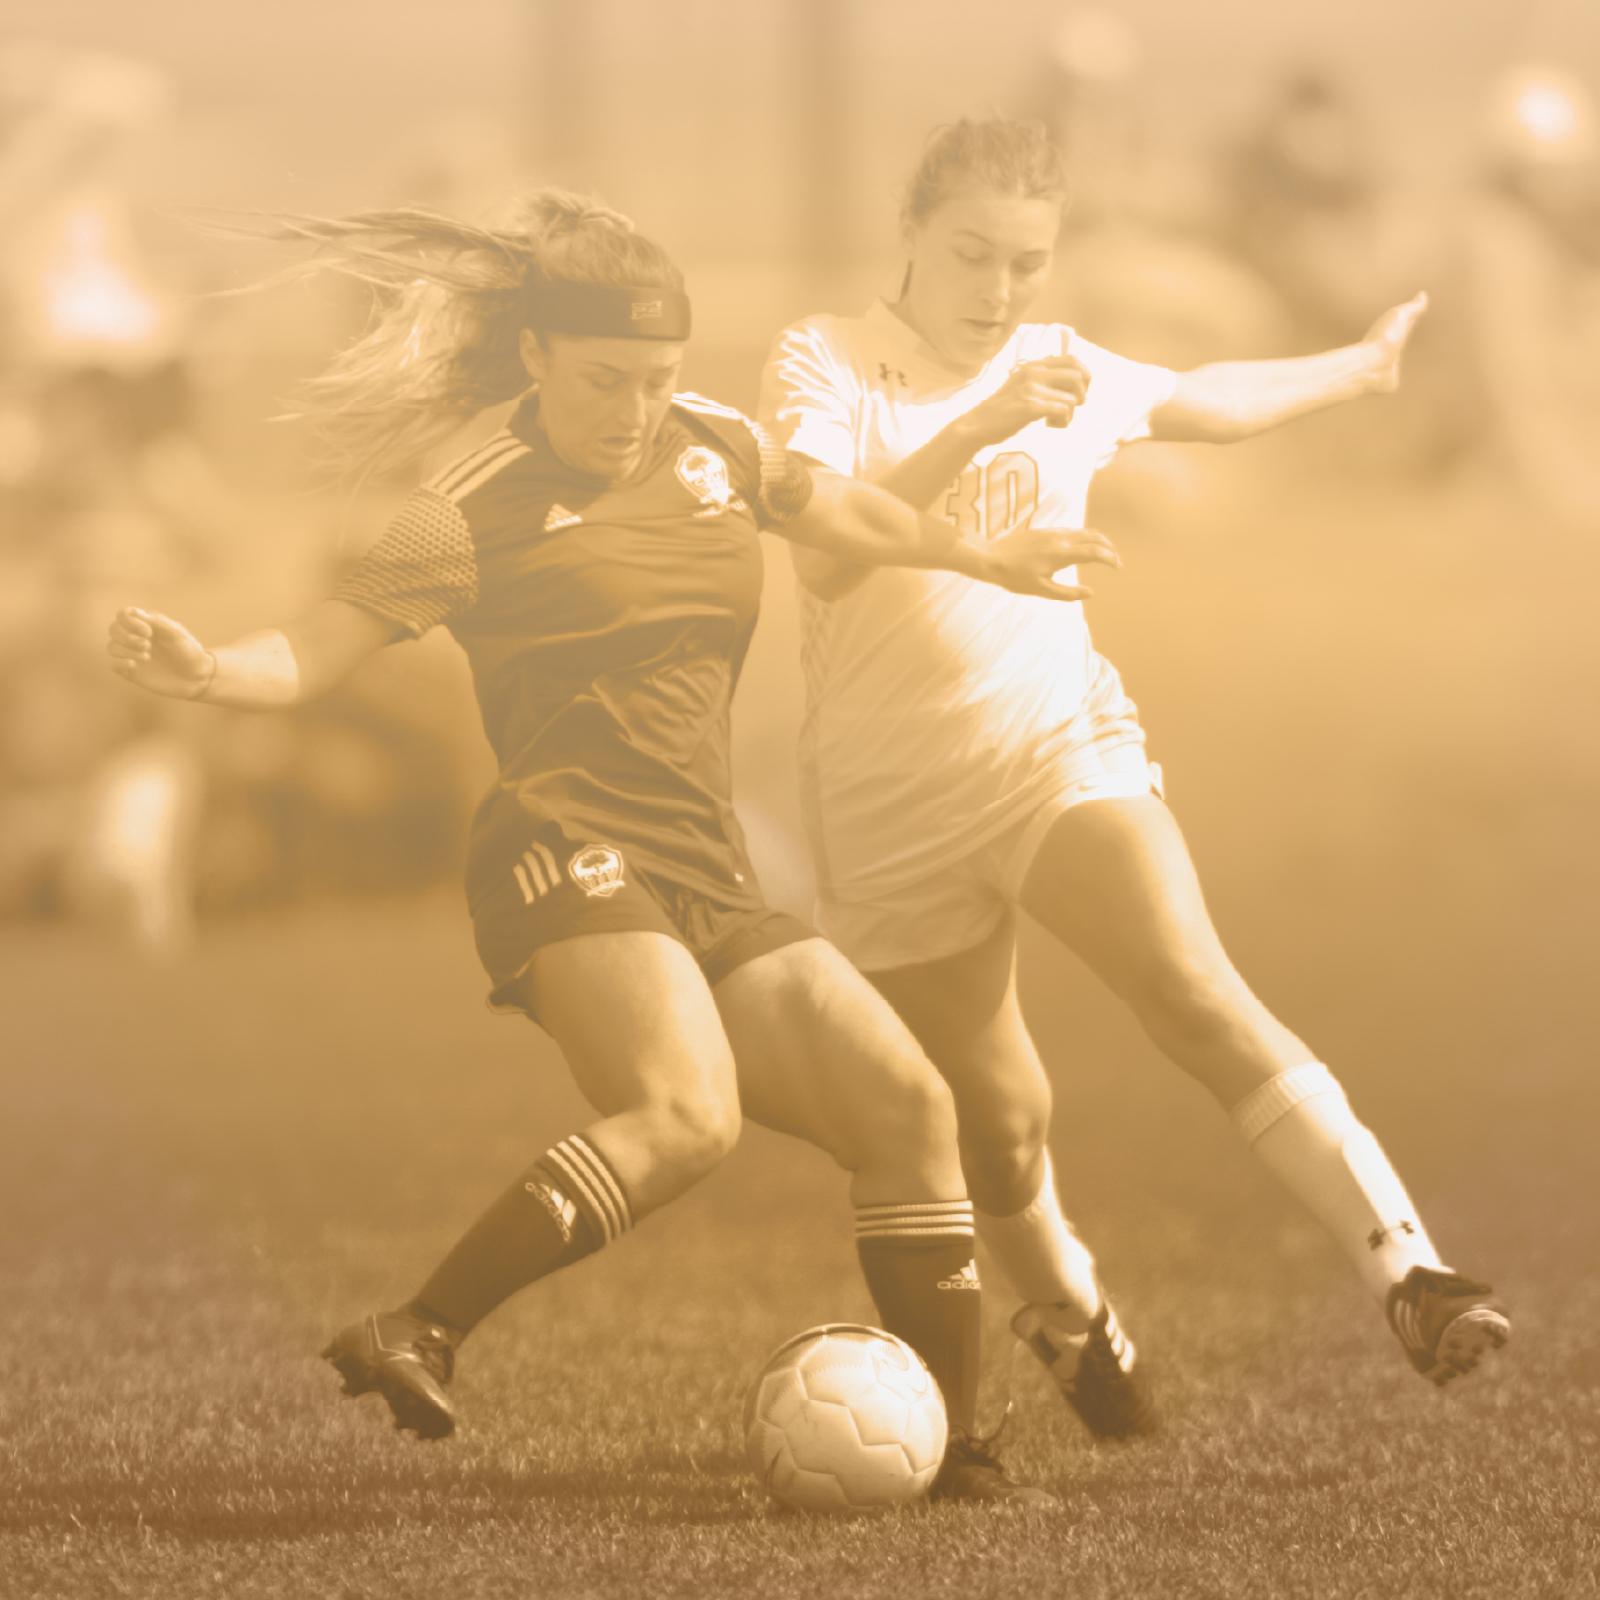 Gold Image Of Girls Playing Soccer